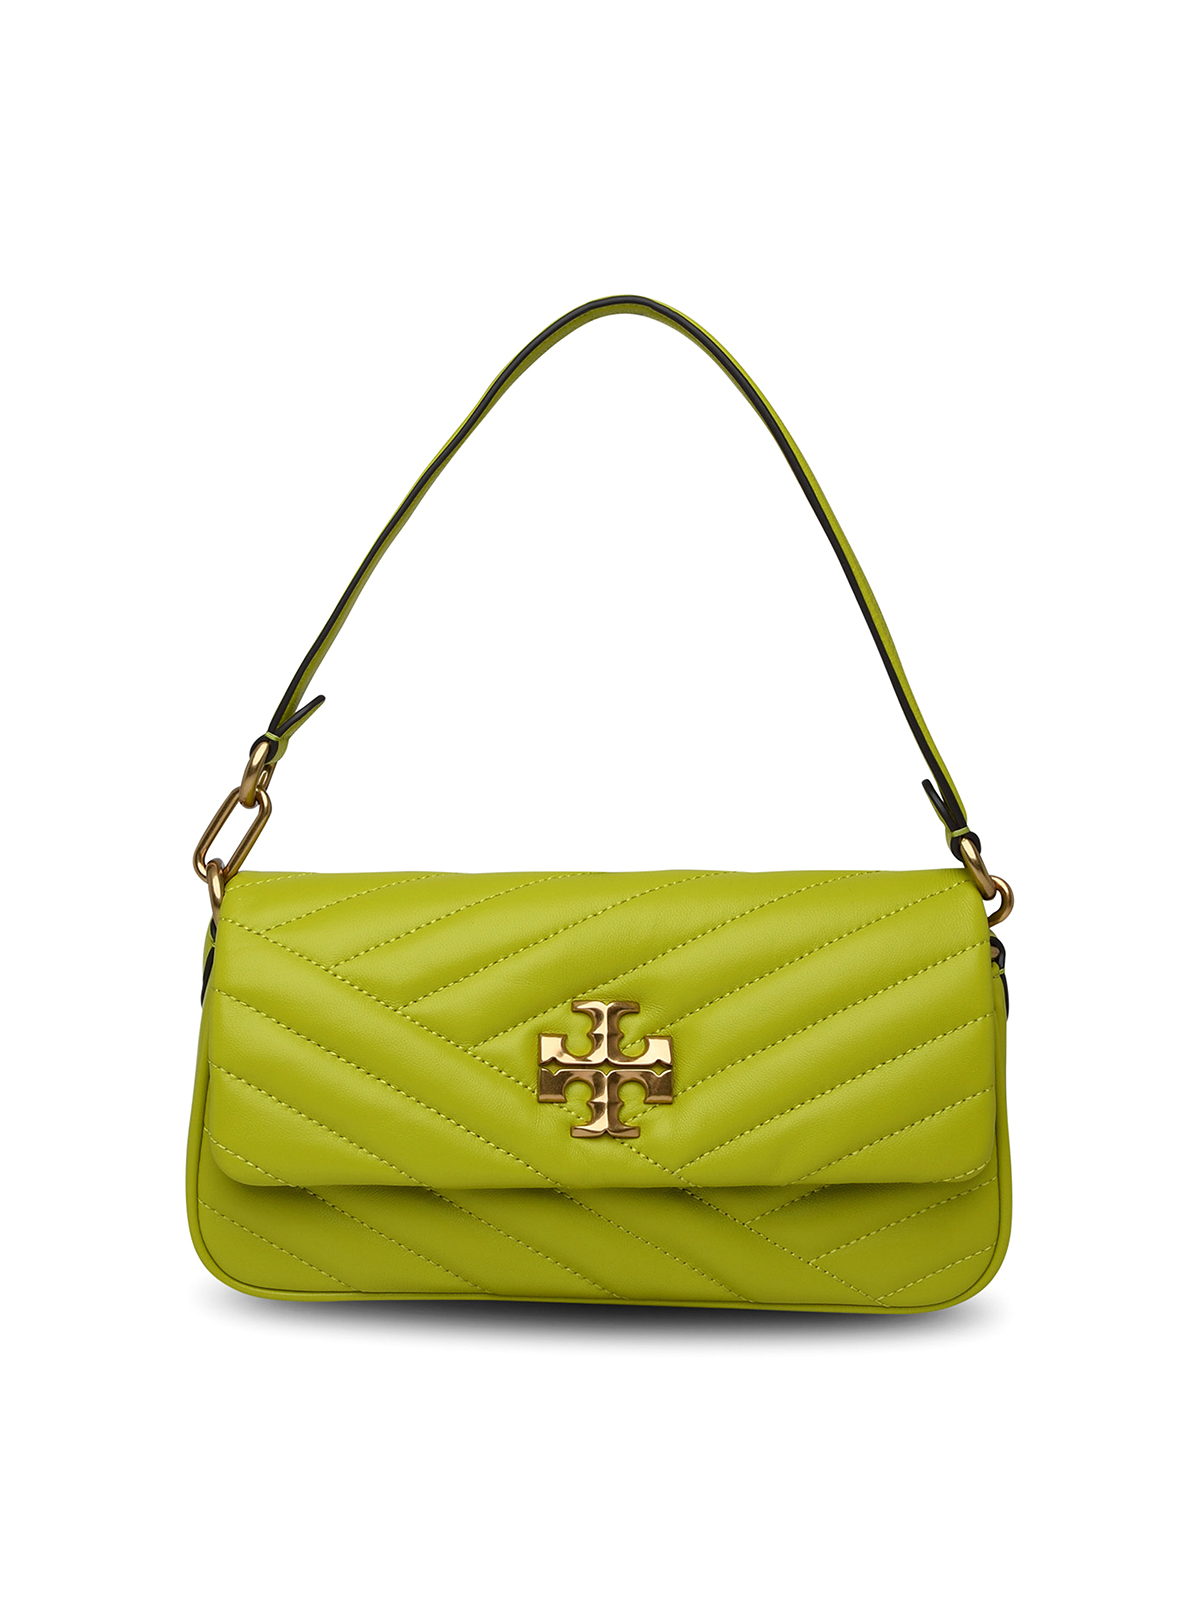 Tory Burch Small Kira Bag In Lime Leather In Yellow